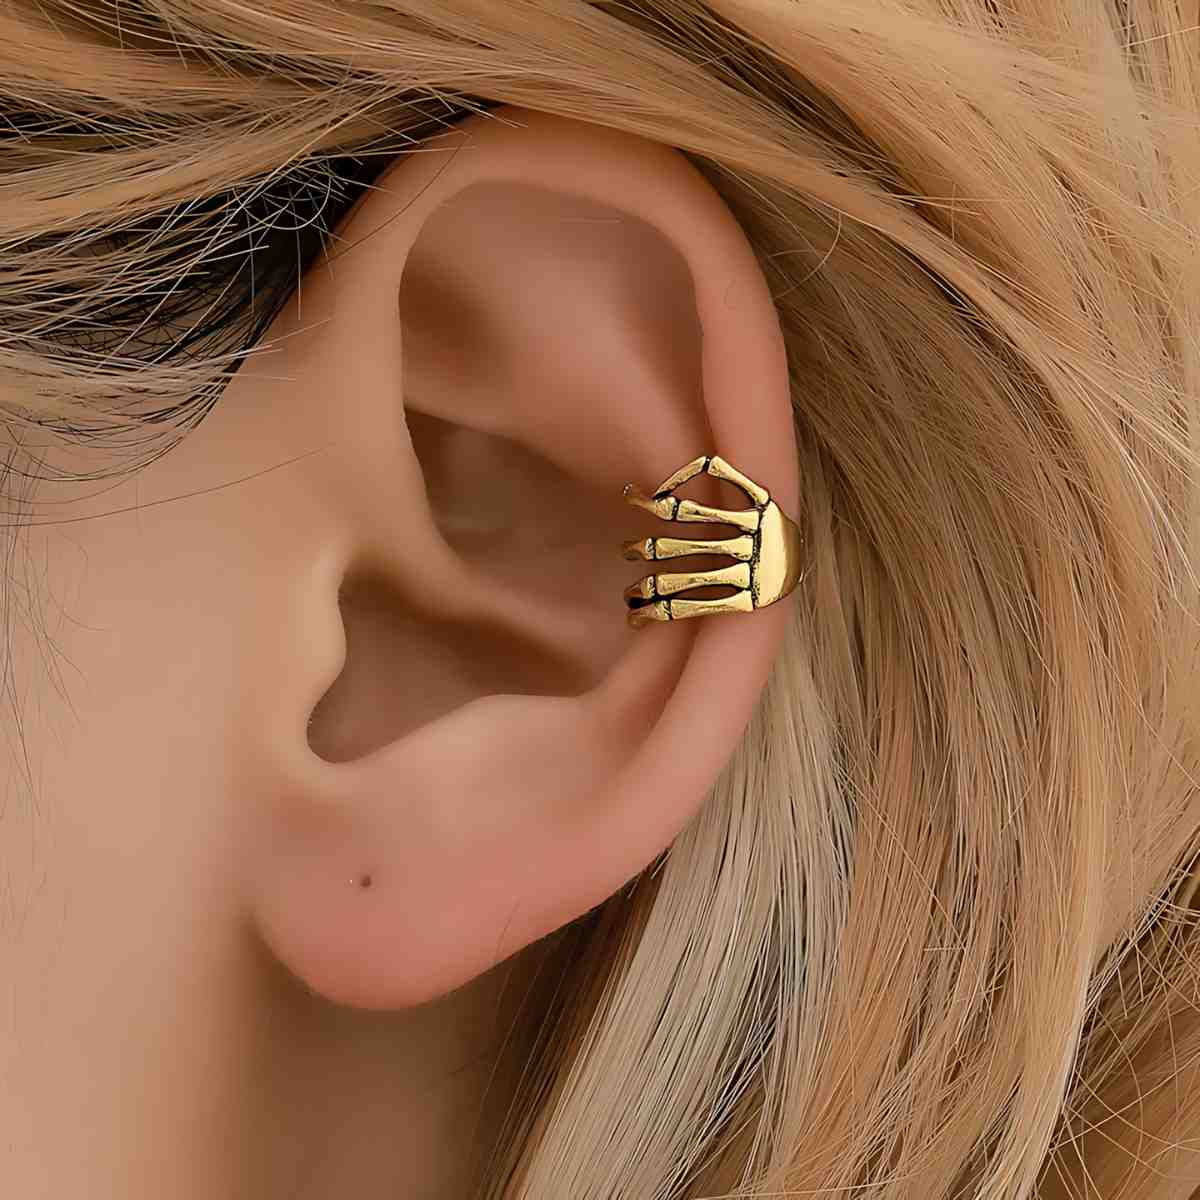 Skeleton Hand Ear Cuff Gold - Xenos Jewelry